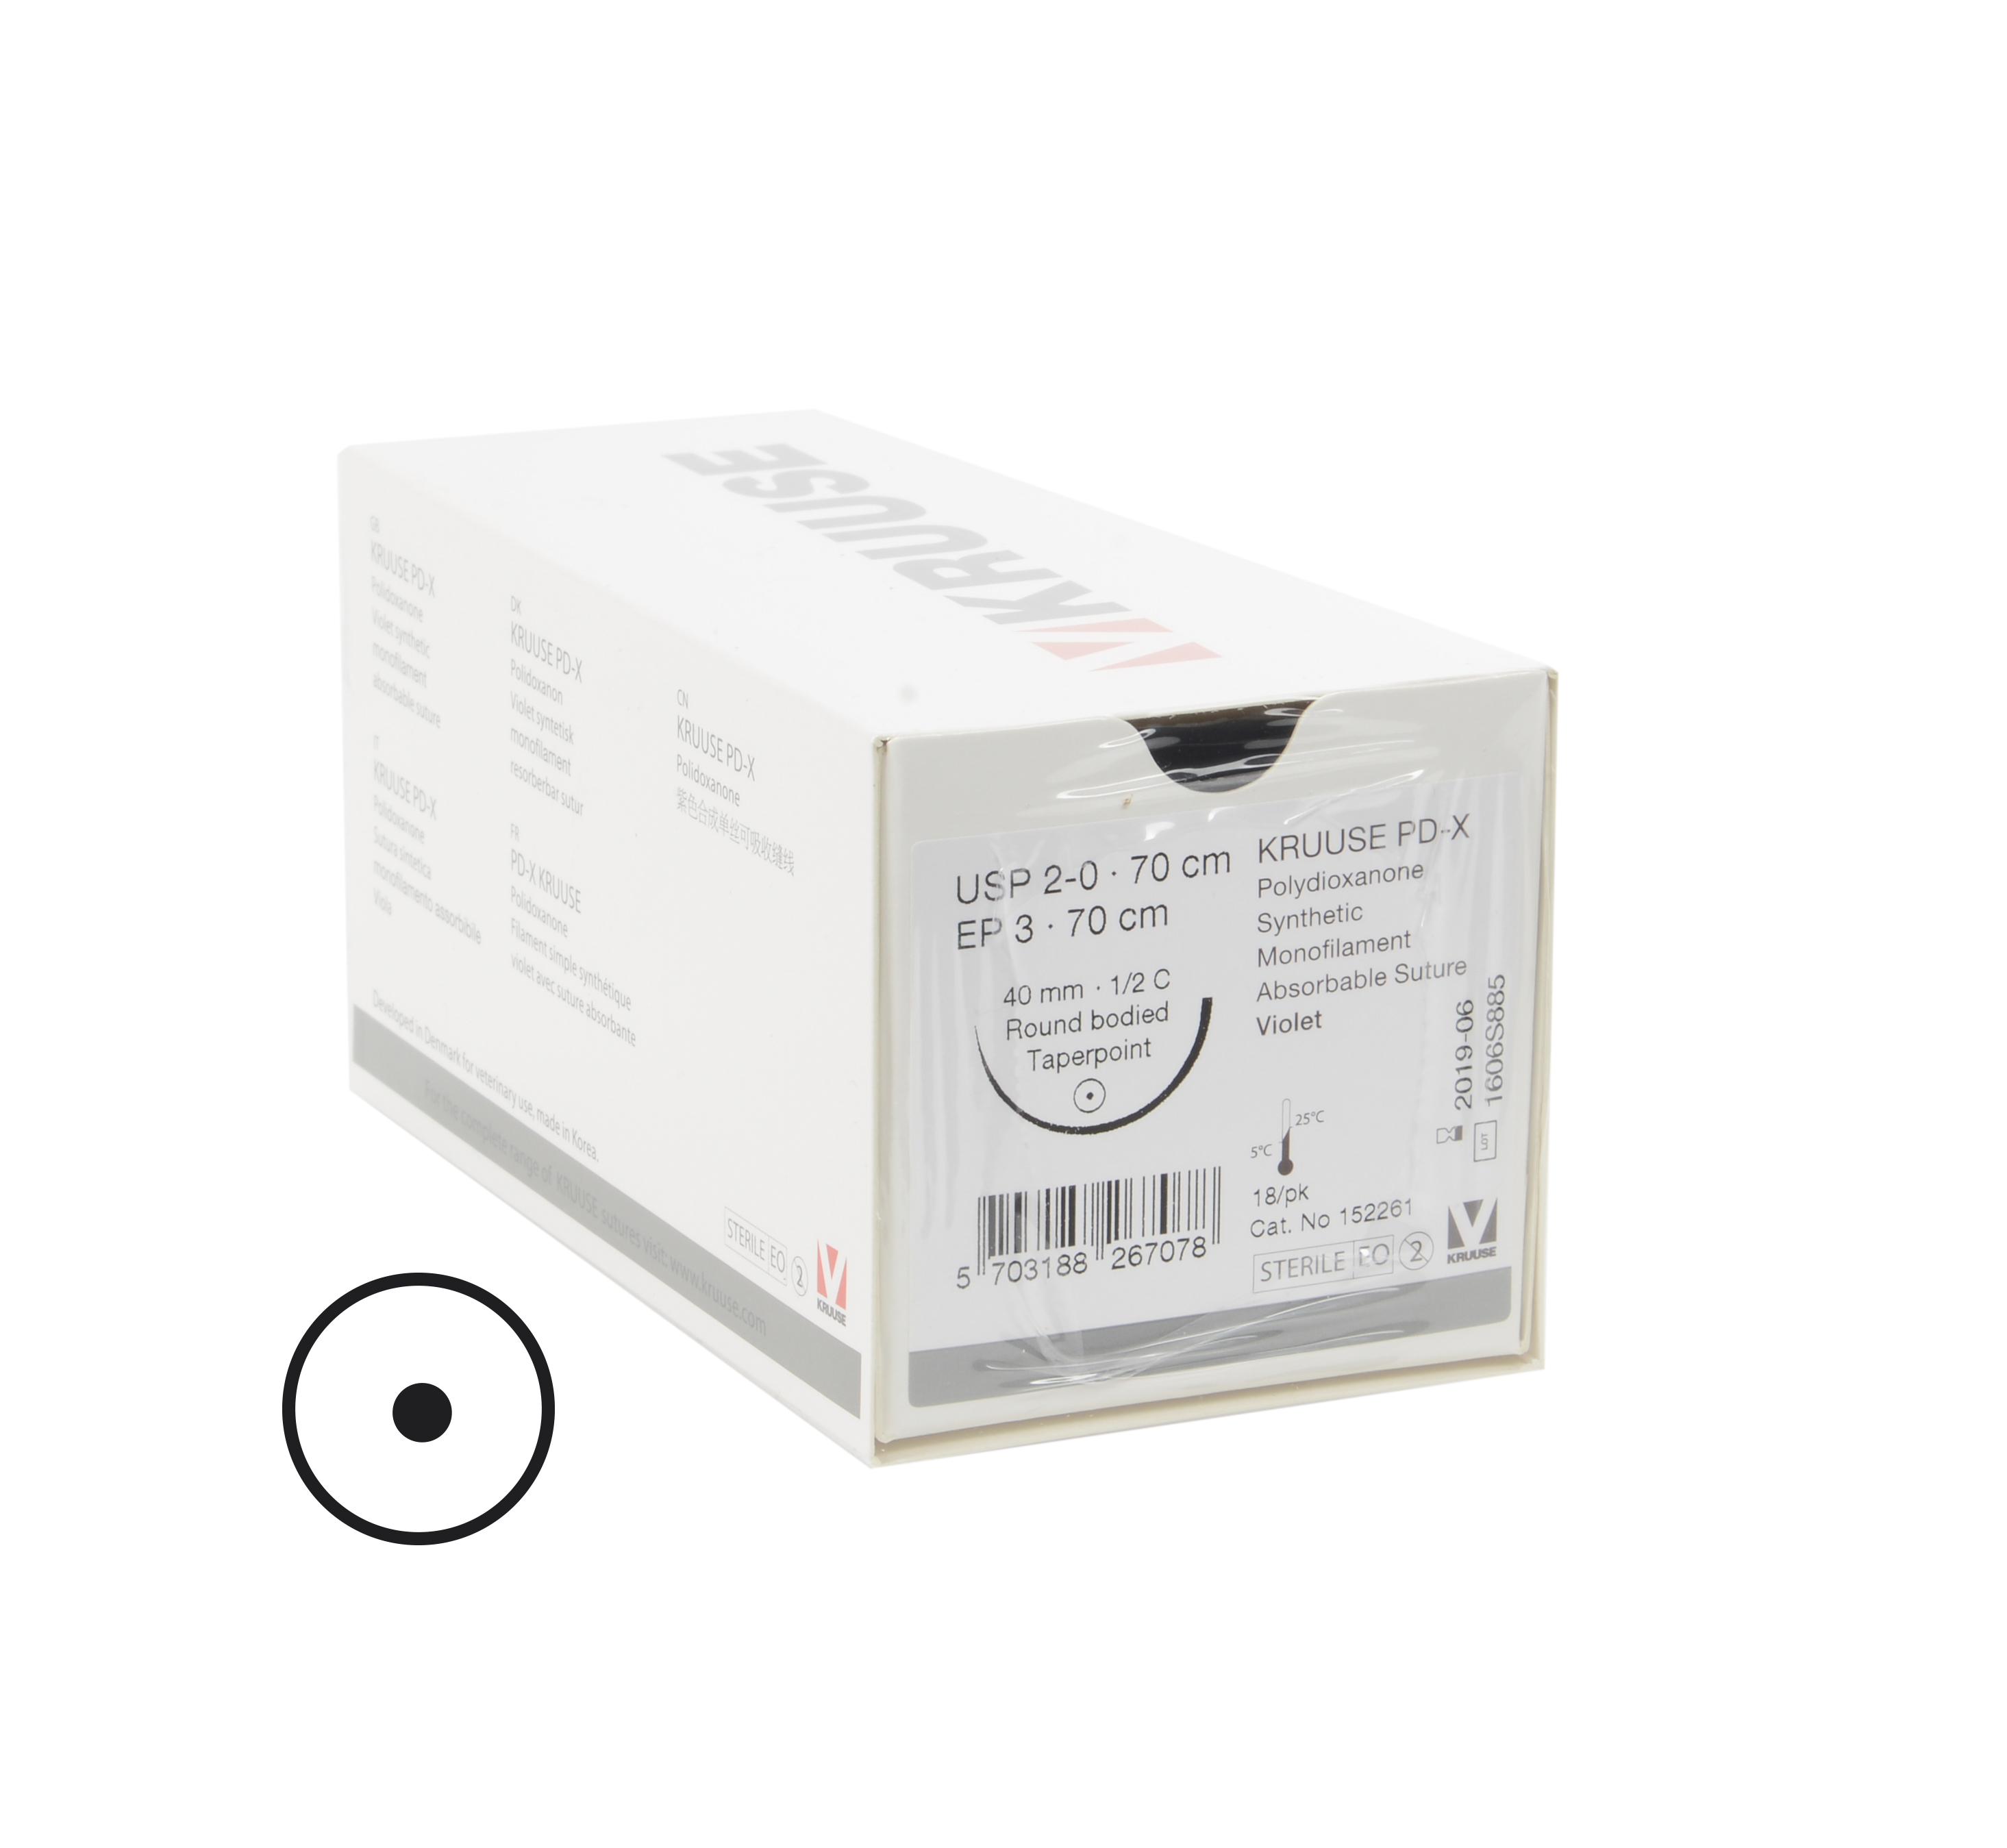 KRUUSE PD-X suture, USP 2-0/EP 3, 70 cm. Needle: 40 mm, ½ C, Round Bodied, taperpoint. 18/pk